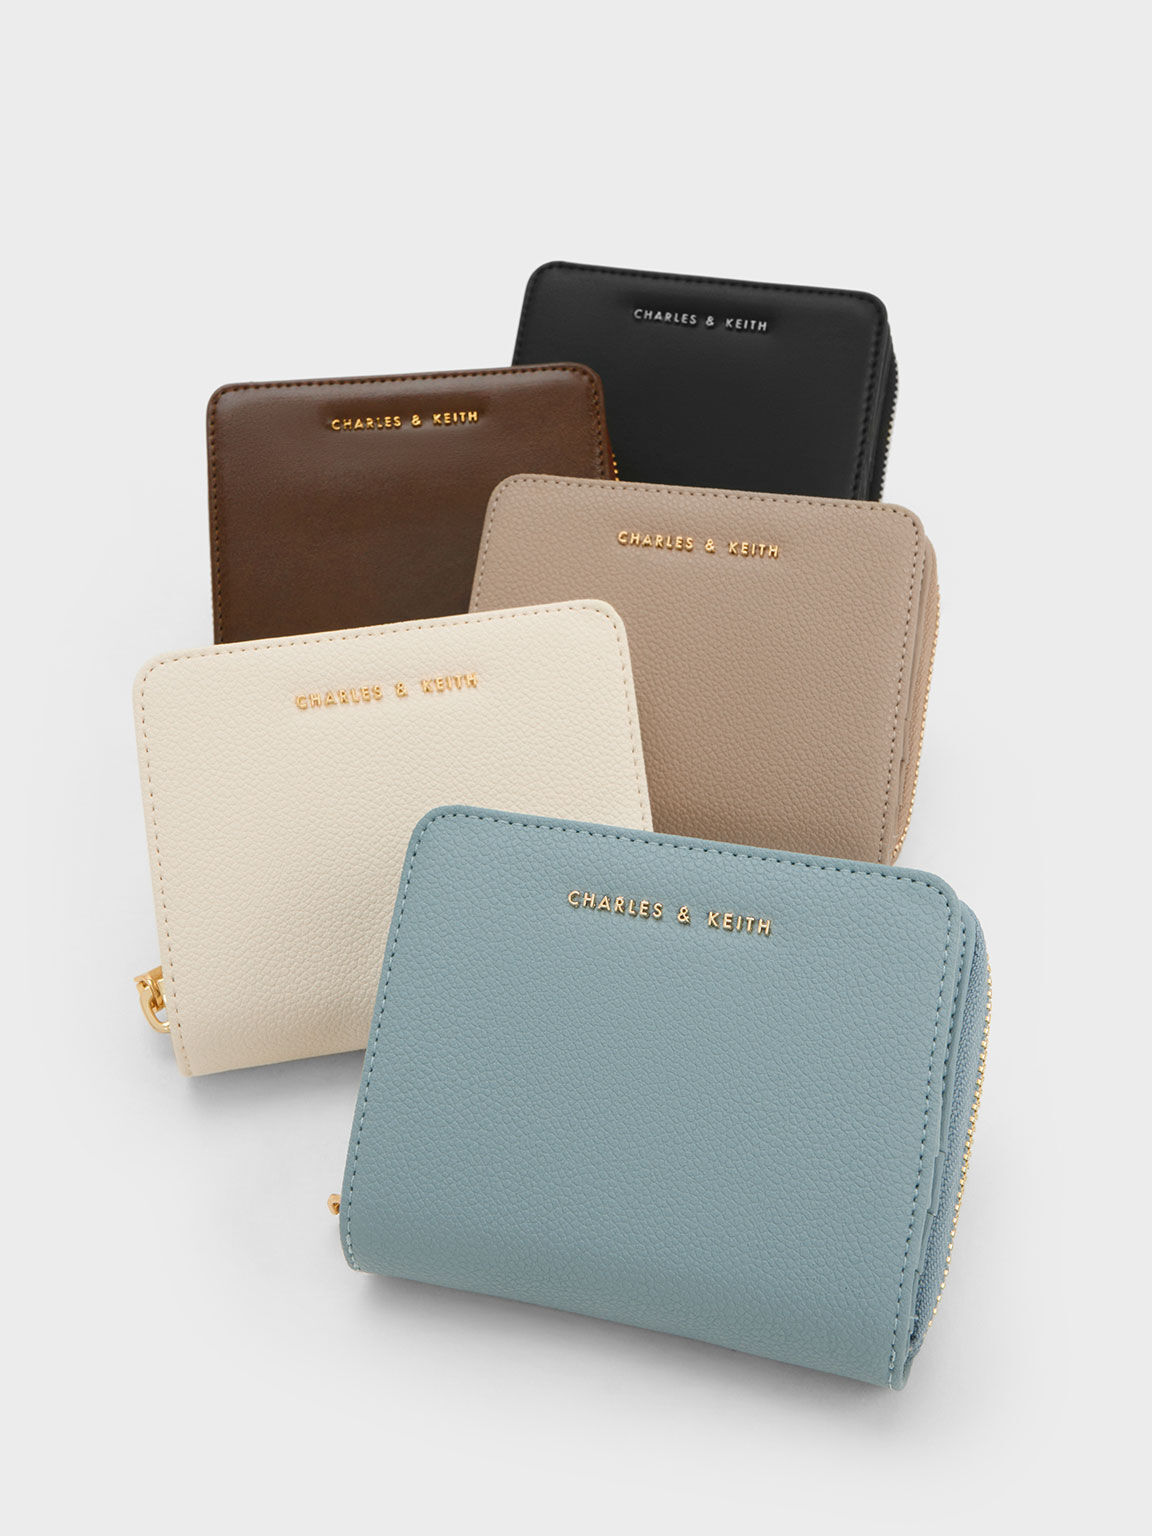 Women's Short & Small Wallets | Shop Online | CHARLES & KEITH US